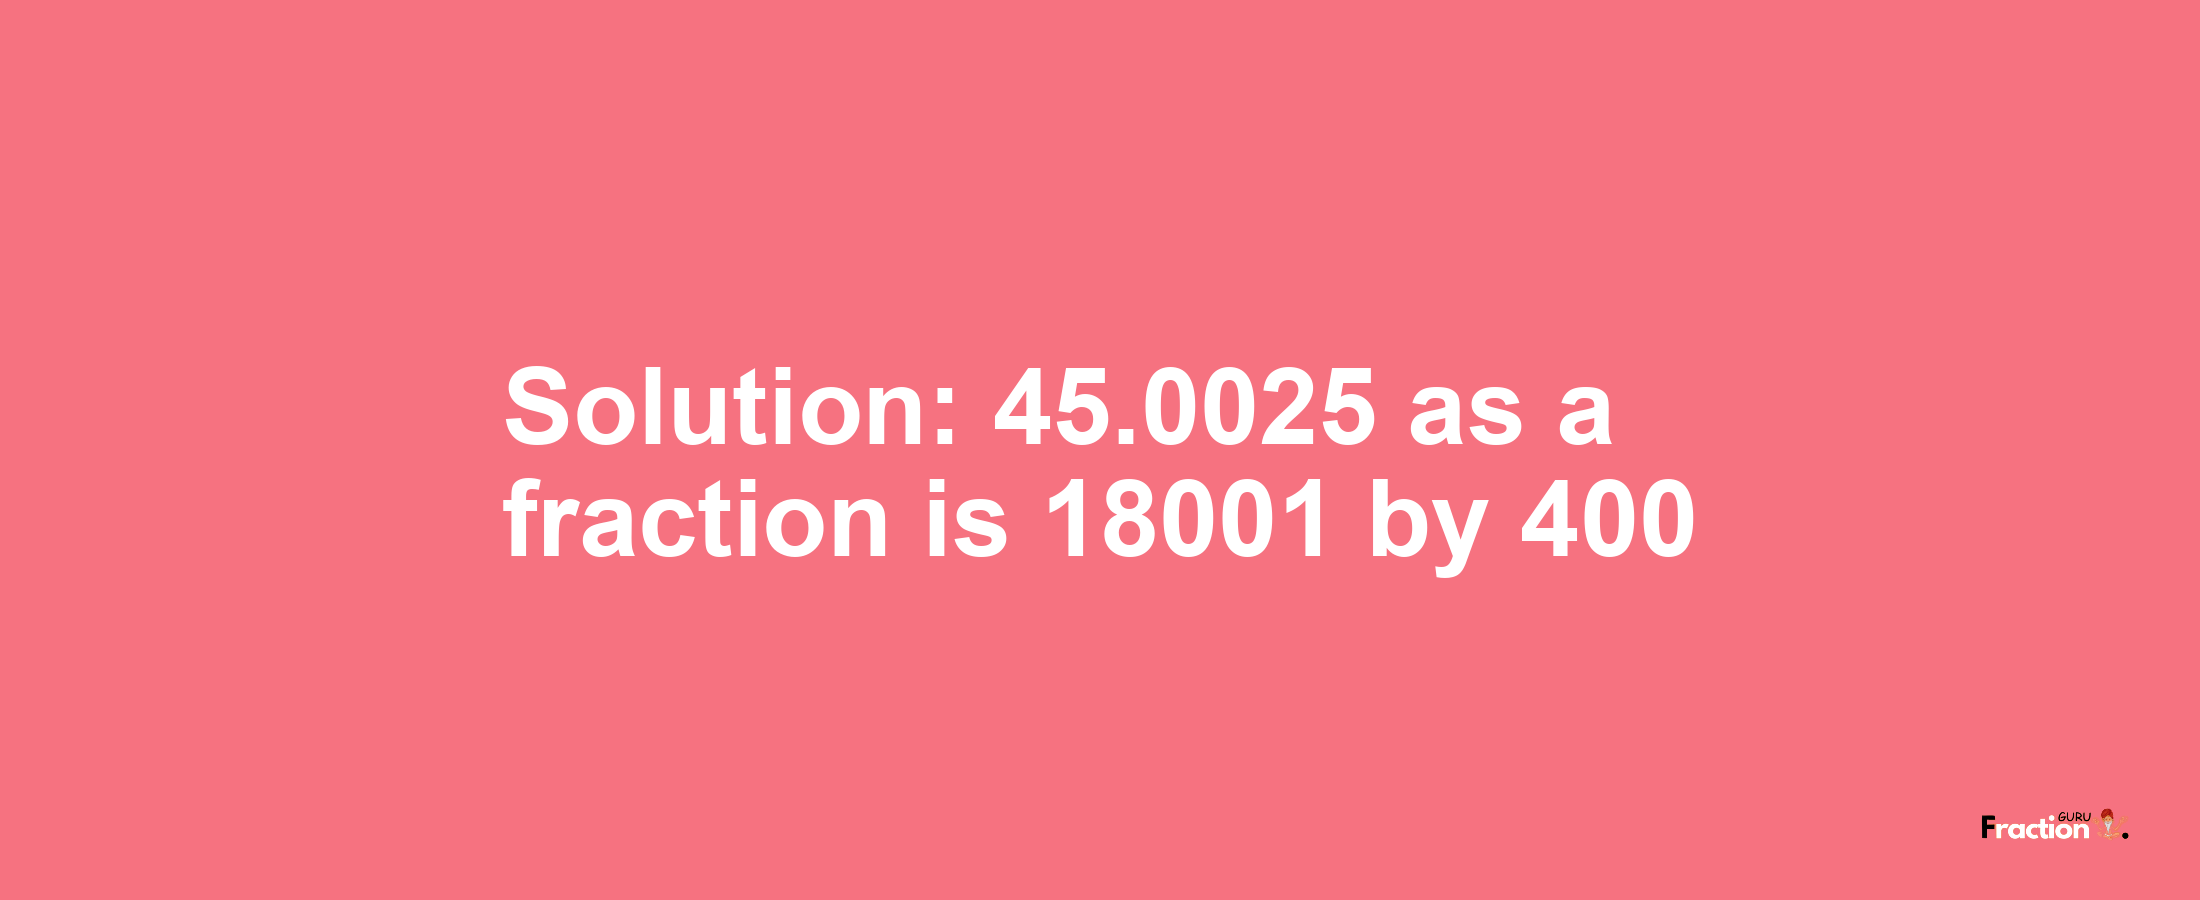 Solution:45.0025 as a fraction is 18001/400